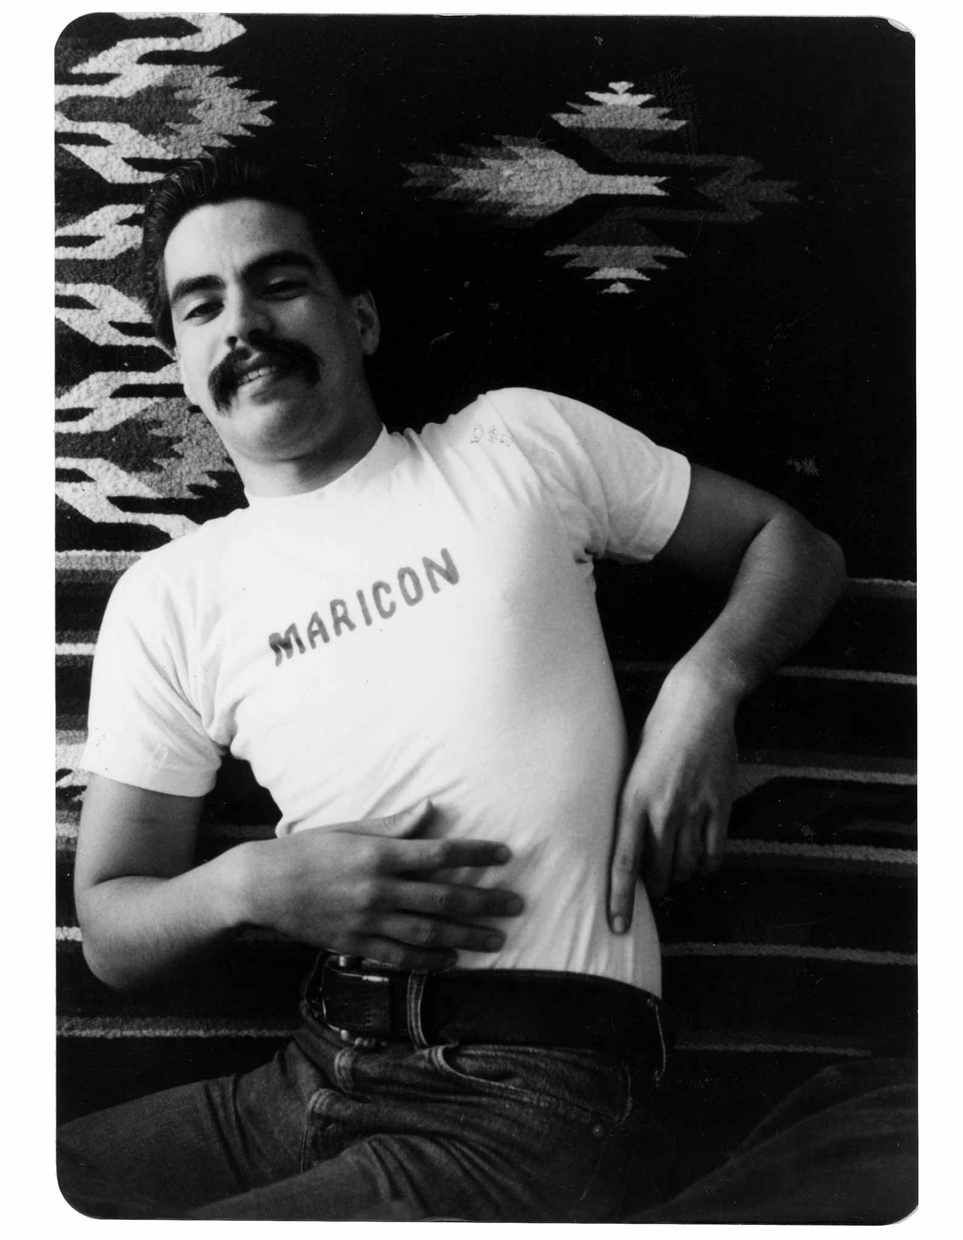 A black and white photo of a Latino man smiling laying on a blanket wearing a shirt that says "MARICON."